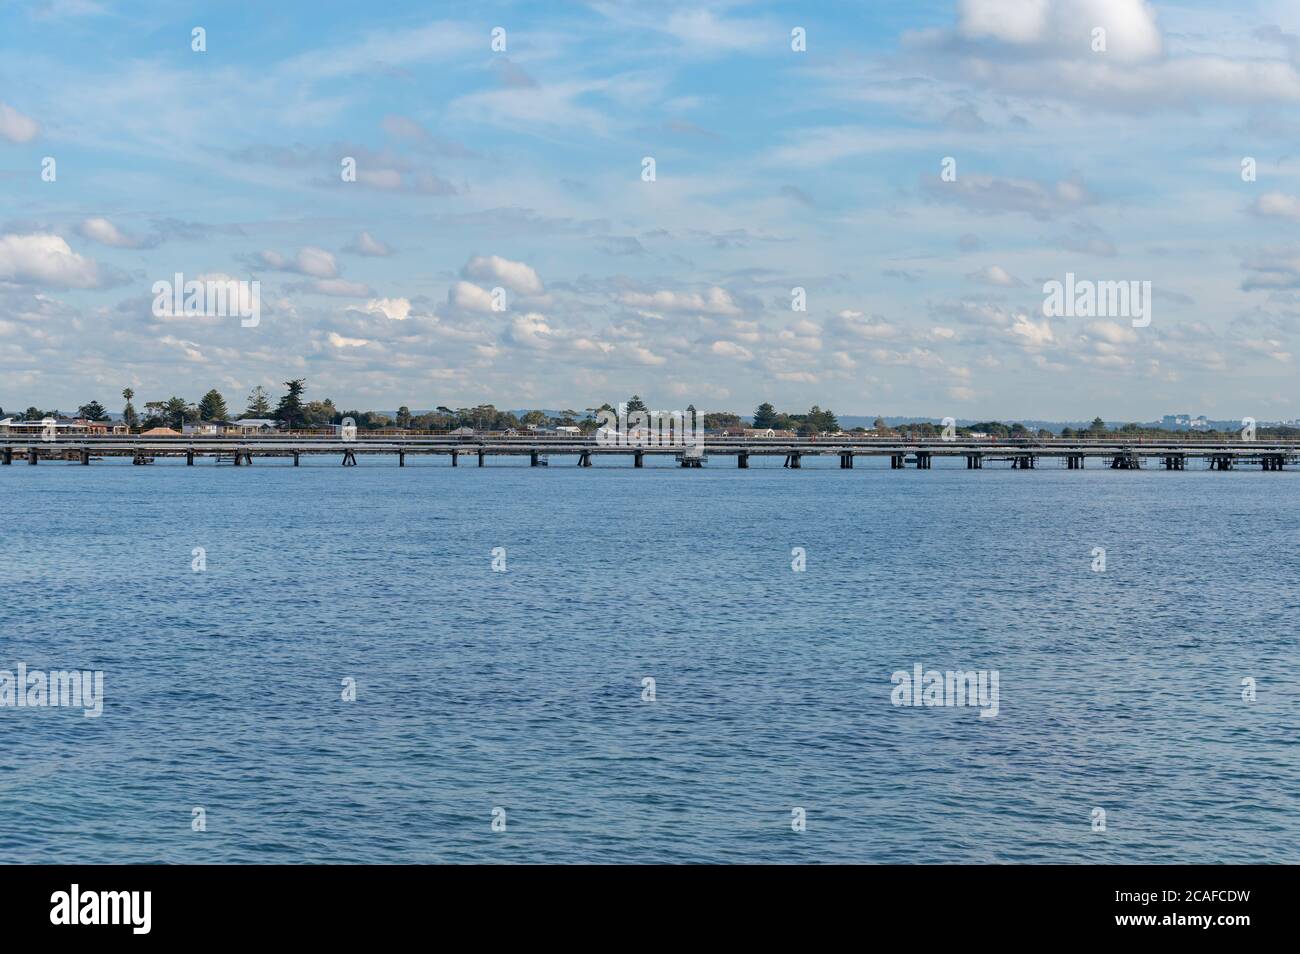 Sydney NSW Australia July 9th 2020 - View of Botany Bay Blue Water and Kurnell Pier on a sunny winter afternoon Stock Photo